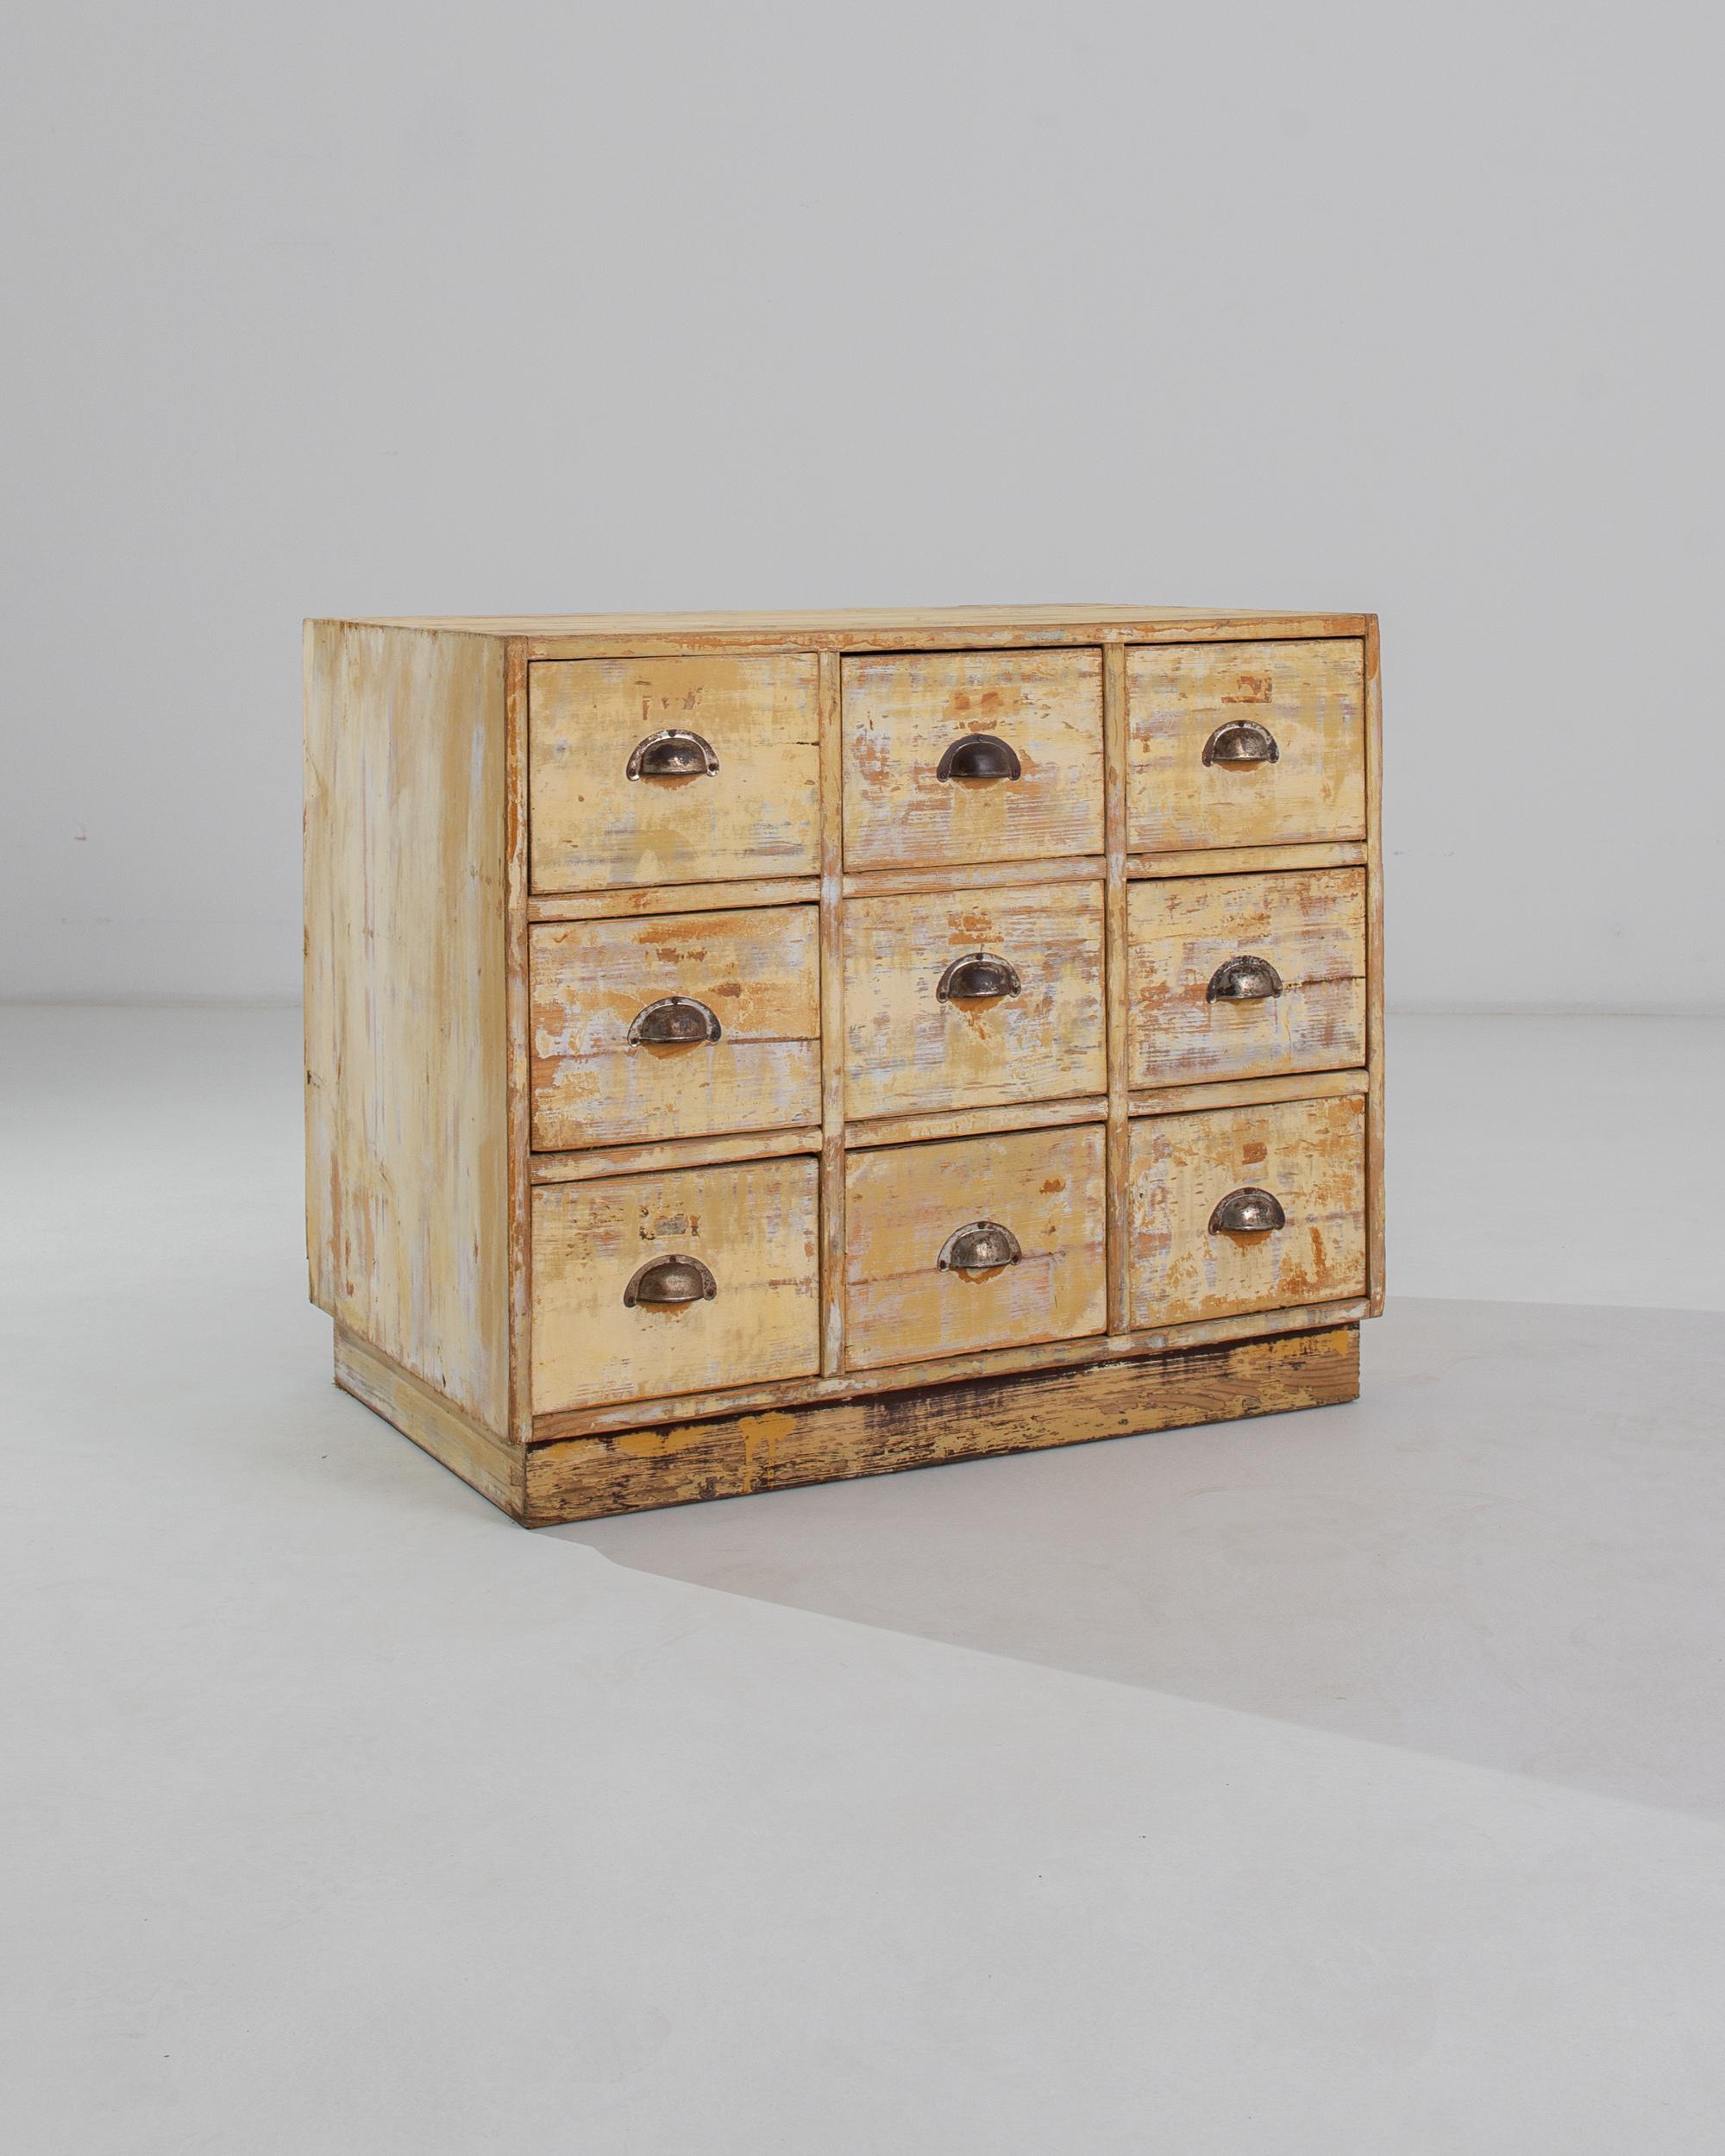 An attractive patina gives this utilitarian nine-drawer chest a sweet, nostalgic character. Made in Central Europe in the early 20th Century, the deep square shape of the drawers indicates that this piece was once likely used for filing papers in a